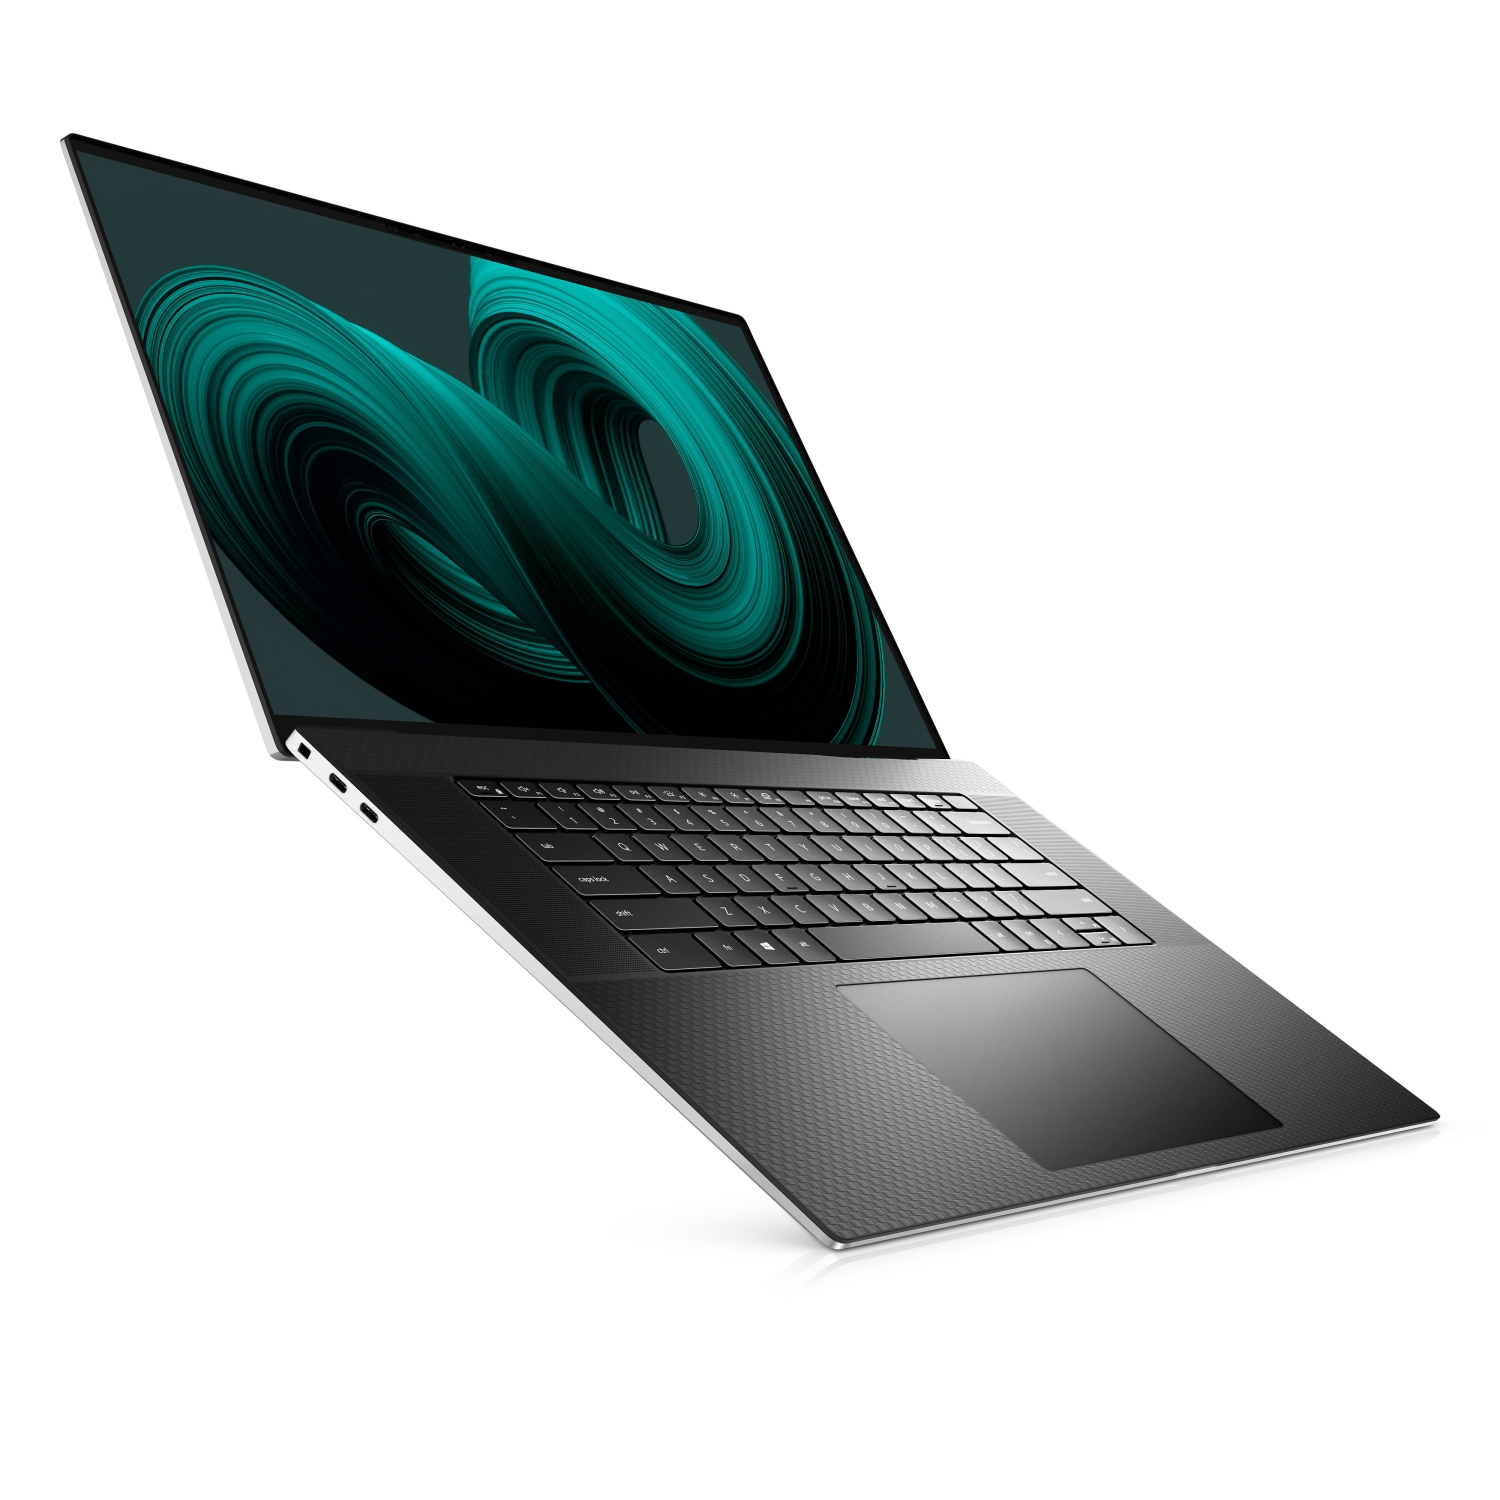 Refurbished (Excellent) - Dell XPS 17 9710 Laptop (2021), 17" 4K Touch, Core i9 - 512GB SSD - 16GB RAM - RTX 3060, 8 Cores @ 4.9 GHz - 11th Gen CPU Certified Refurbished